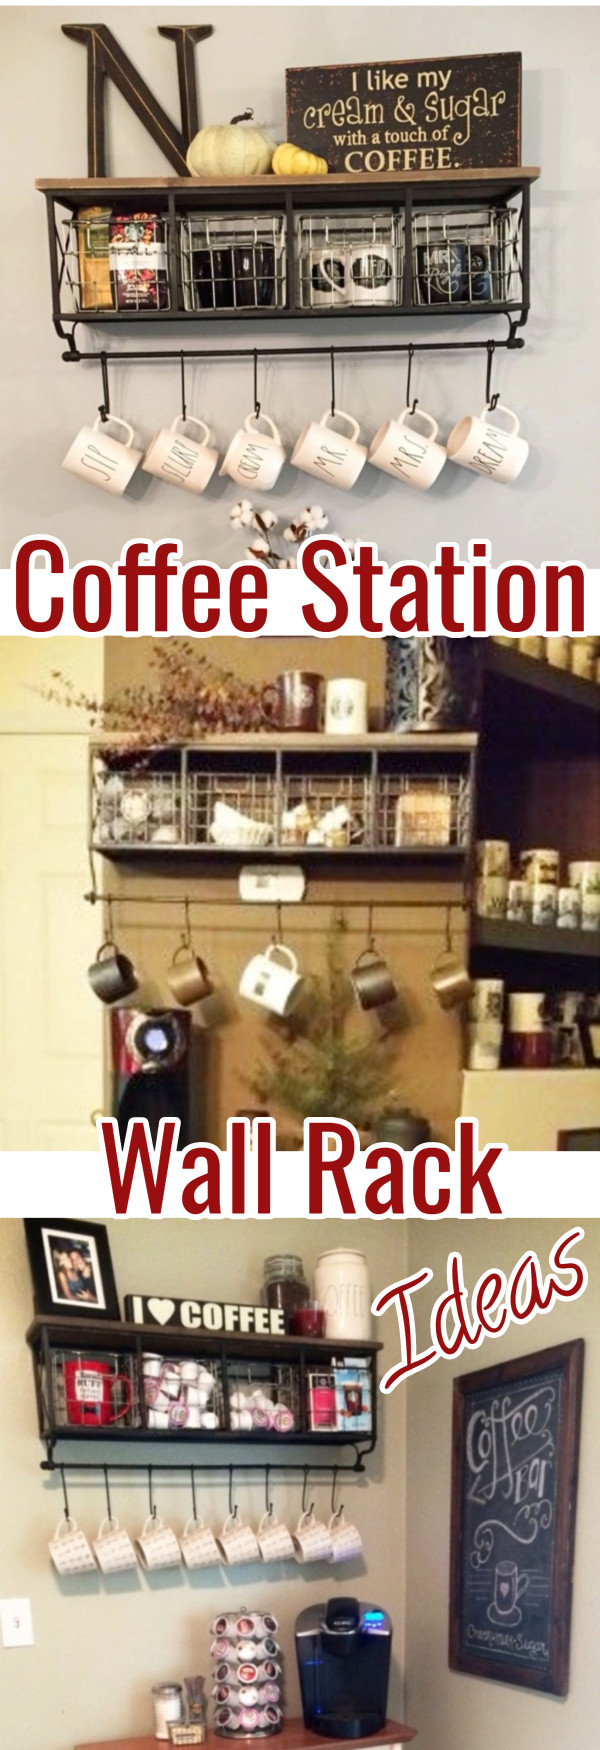 Home Coffee Bars and Kitchen Coffee Station Ideas - Love this coffee bar shelf with hooks (coffee bar mug rack).  One shelf and SO many great DIY ways to use in your kitchen coffee nook!